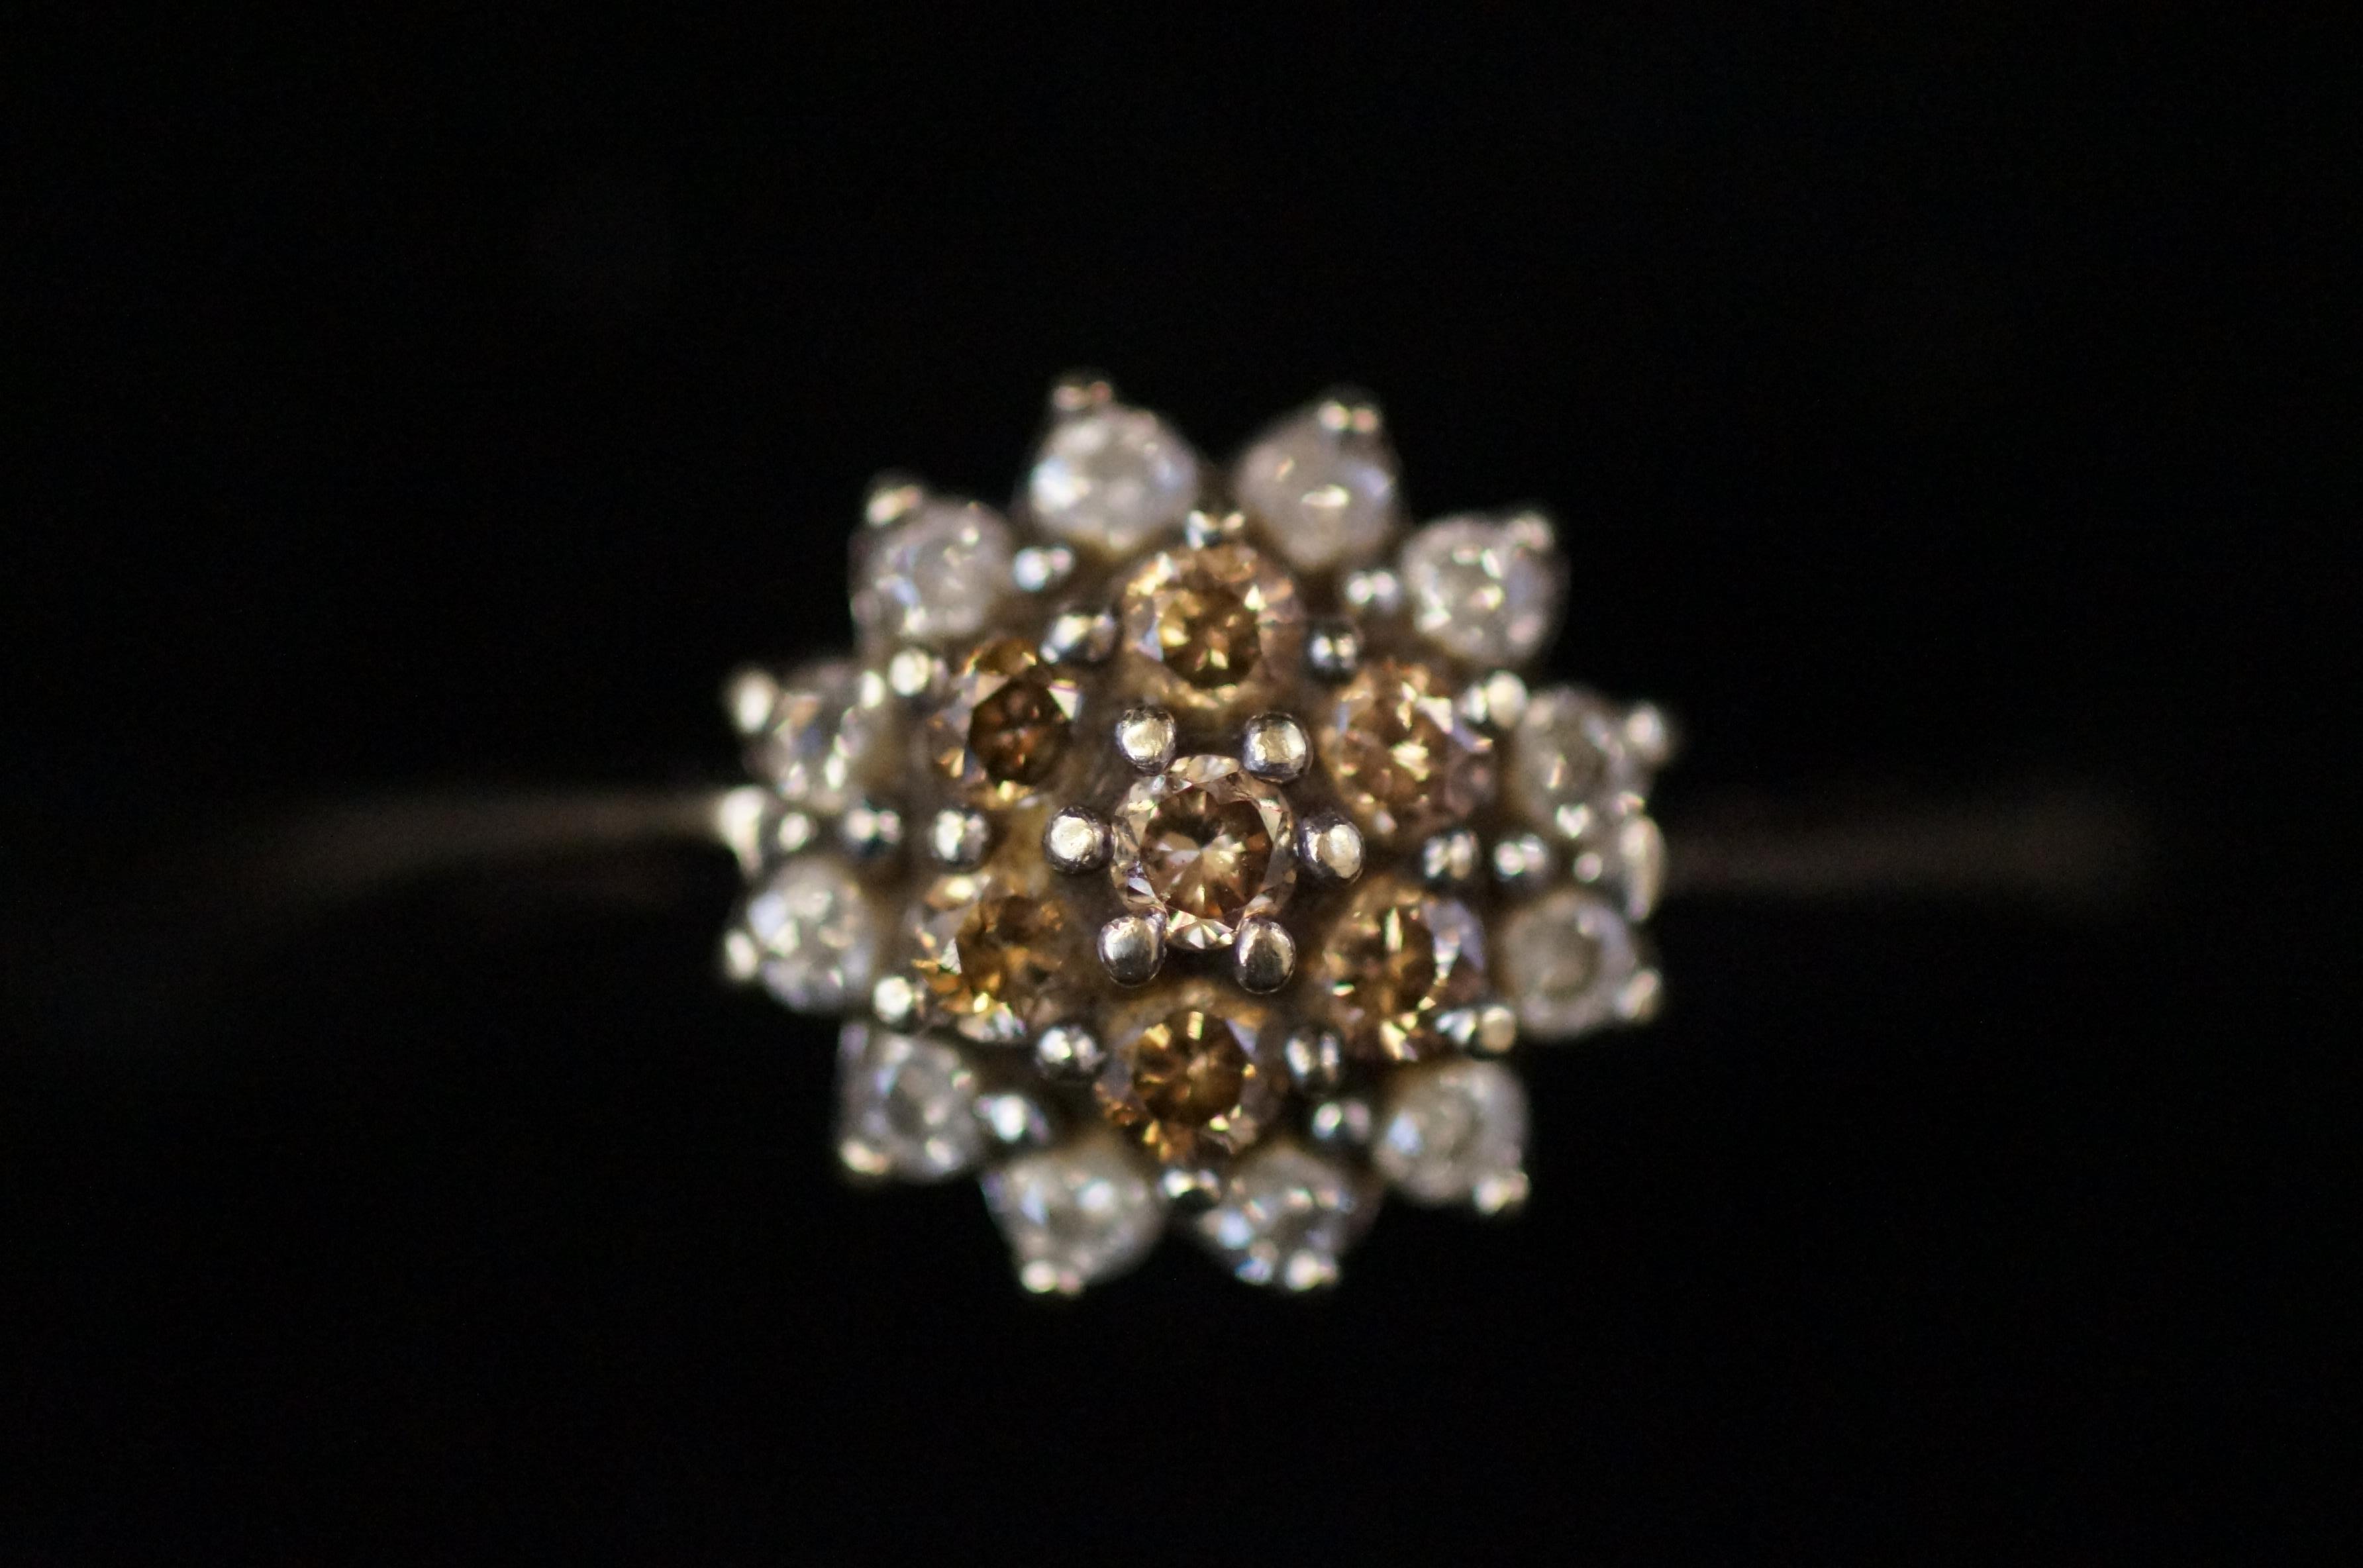 9ct Gold cluster ring set with white gem stones Si